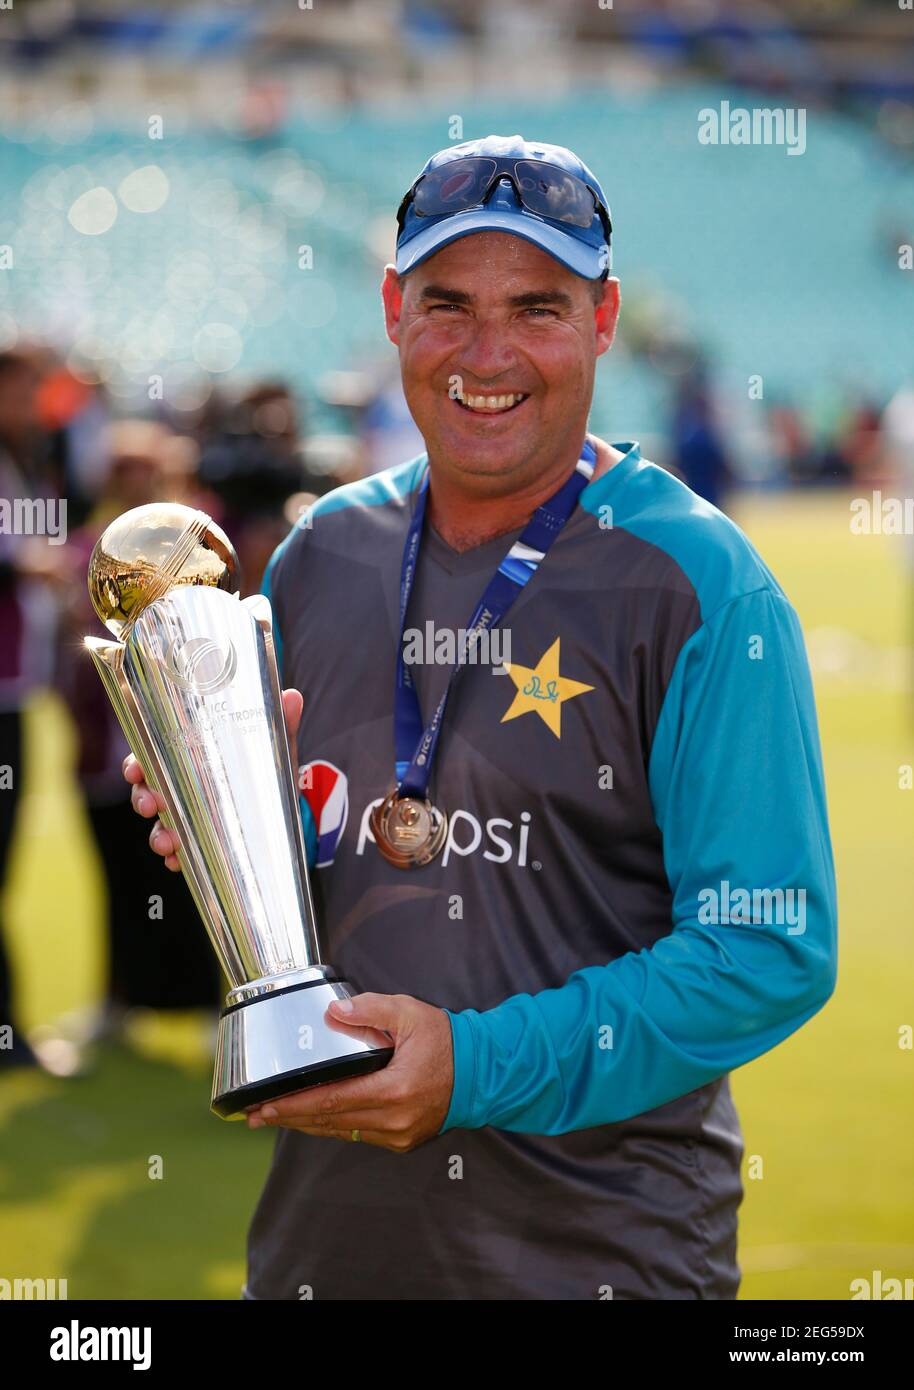 Britain Cricket Pakistan v India 2017 ICC Champions Trophy Final - The Oval - June 18, 2017 Pakistan coach Mickey Arthur as he celebrates winning the ICC Trophy